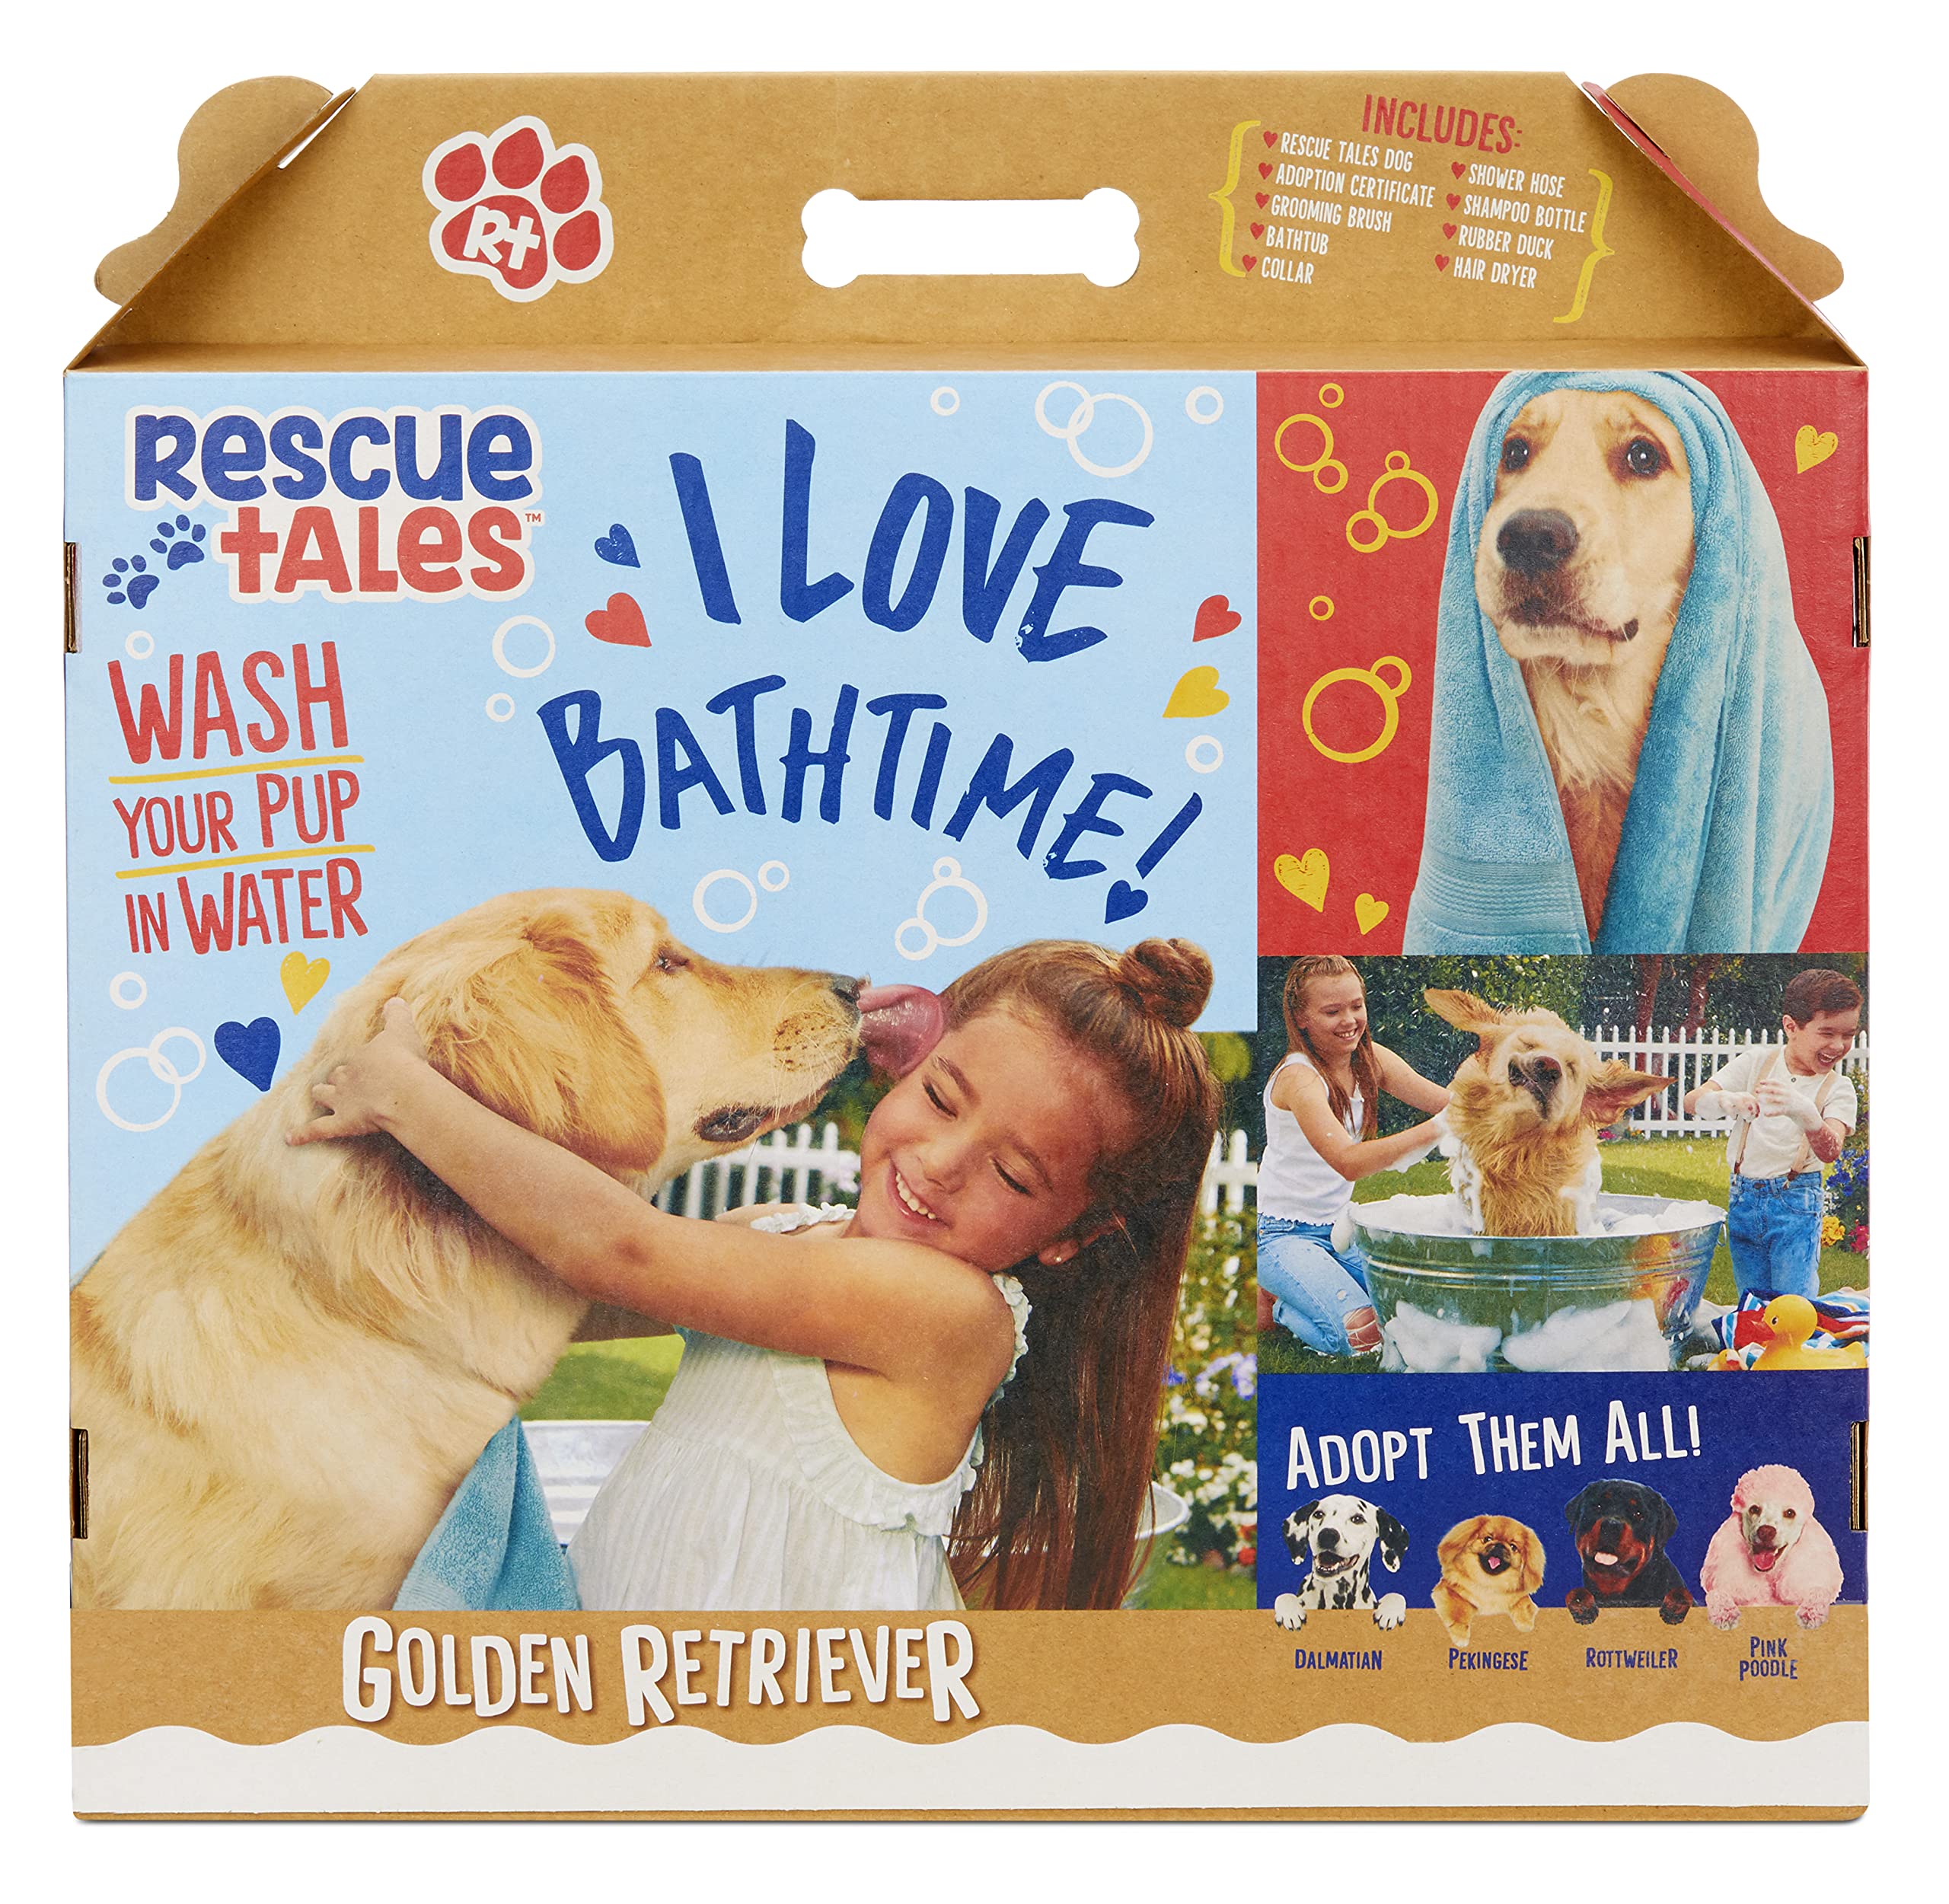 Little Tikes Rescue Tales Scrub 'n Groom Bathtub Playset w/Golden Retriever Toy Stuffed Animal Plush, Wet and Dry, with 9 Accessories- Gifts for Kids, Toys for Girls & Boys Ages 3 4 5+ Years Old